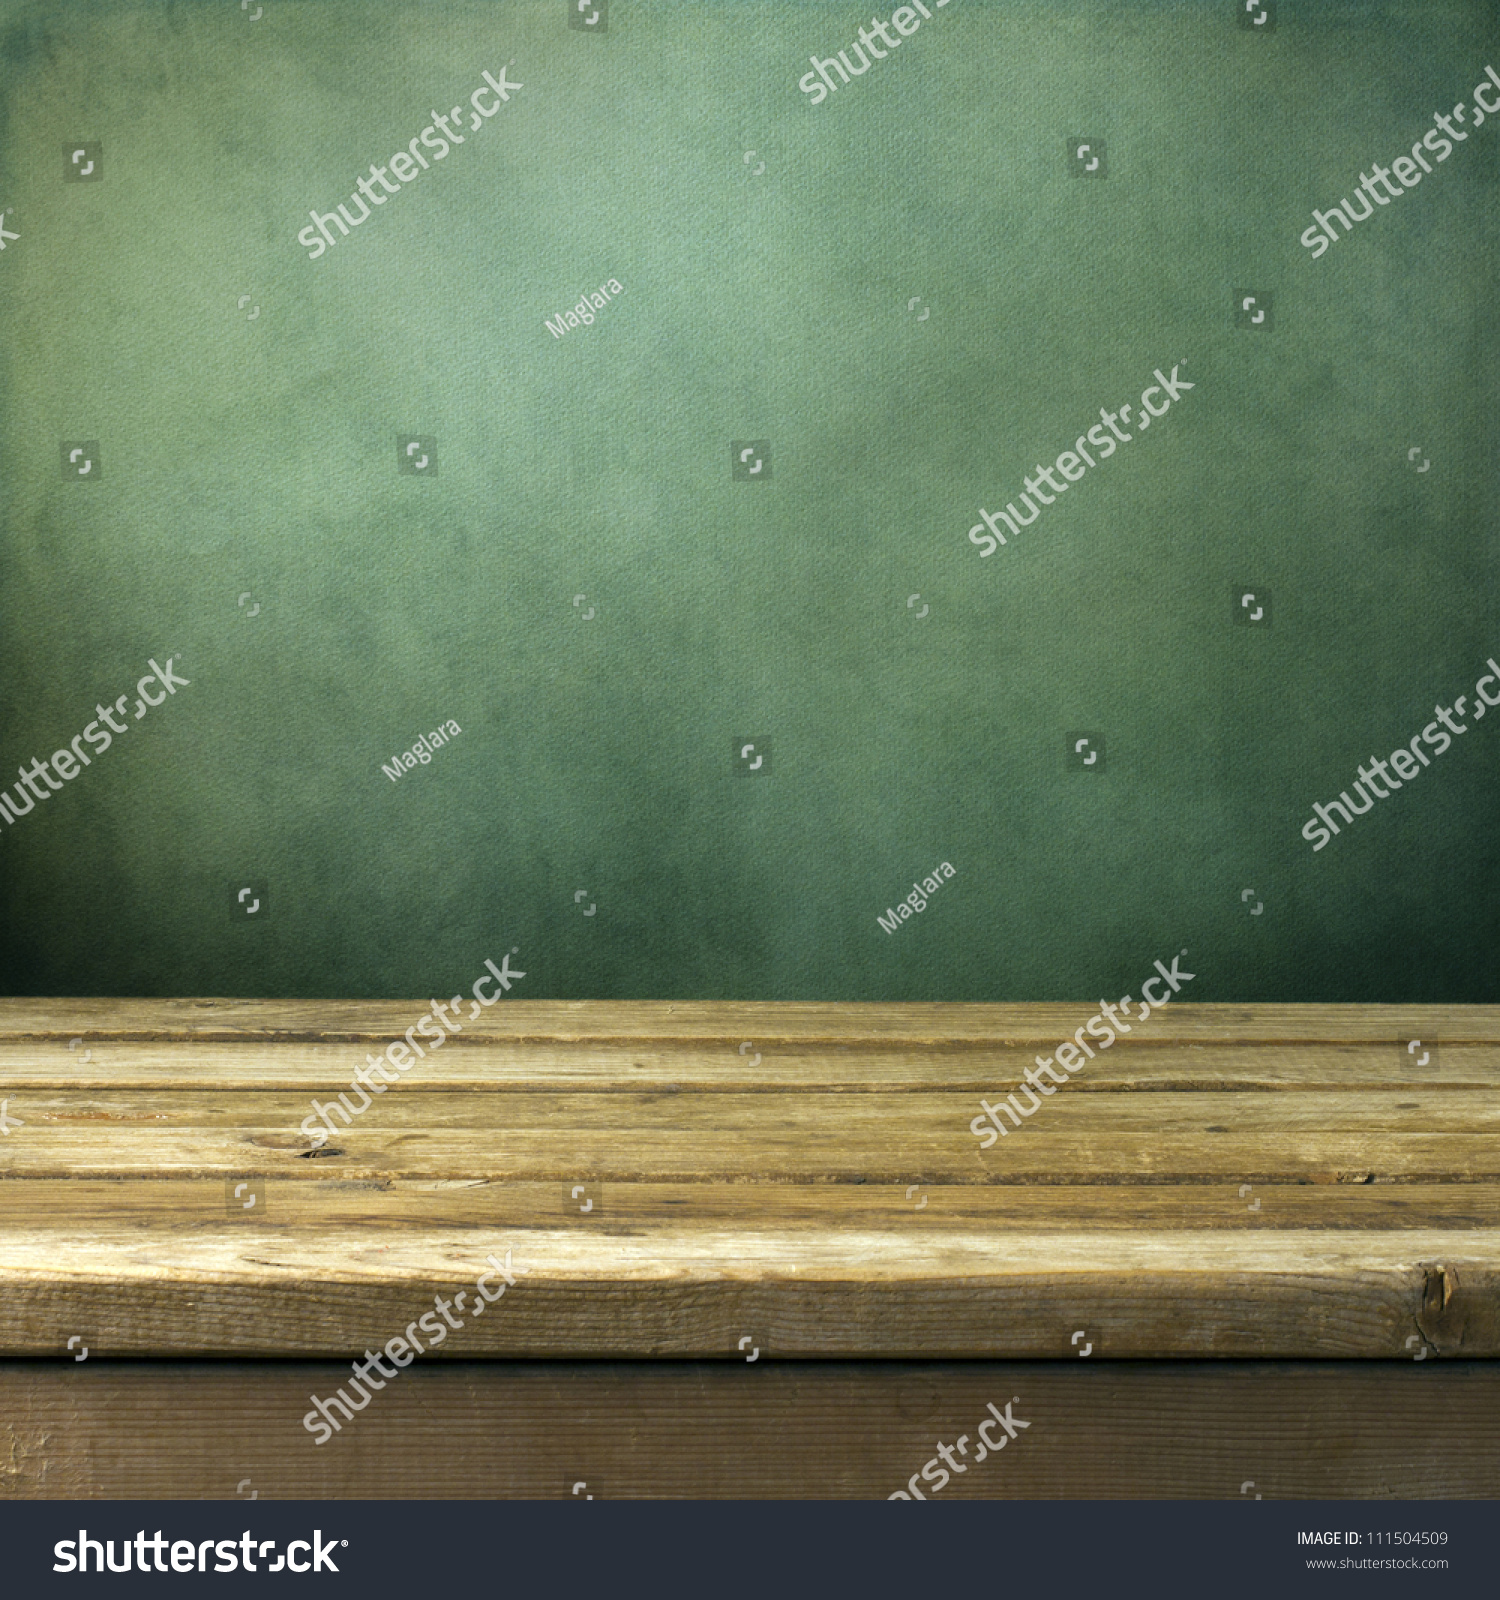 Wooden deck table on green grunge background #111504509